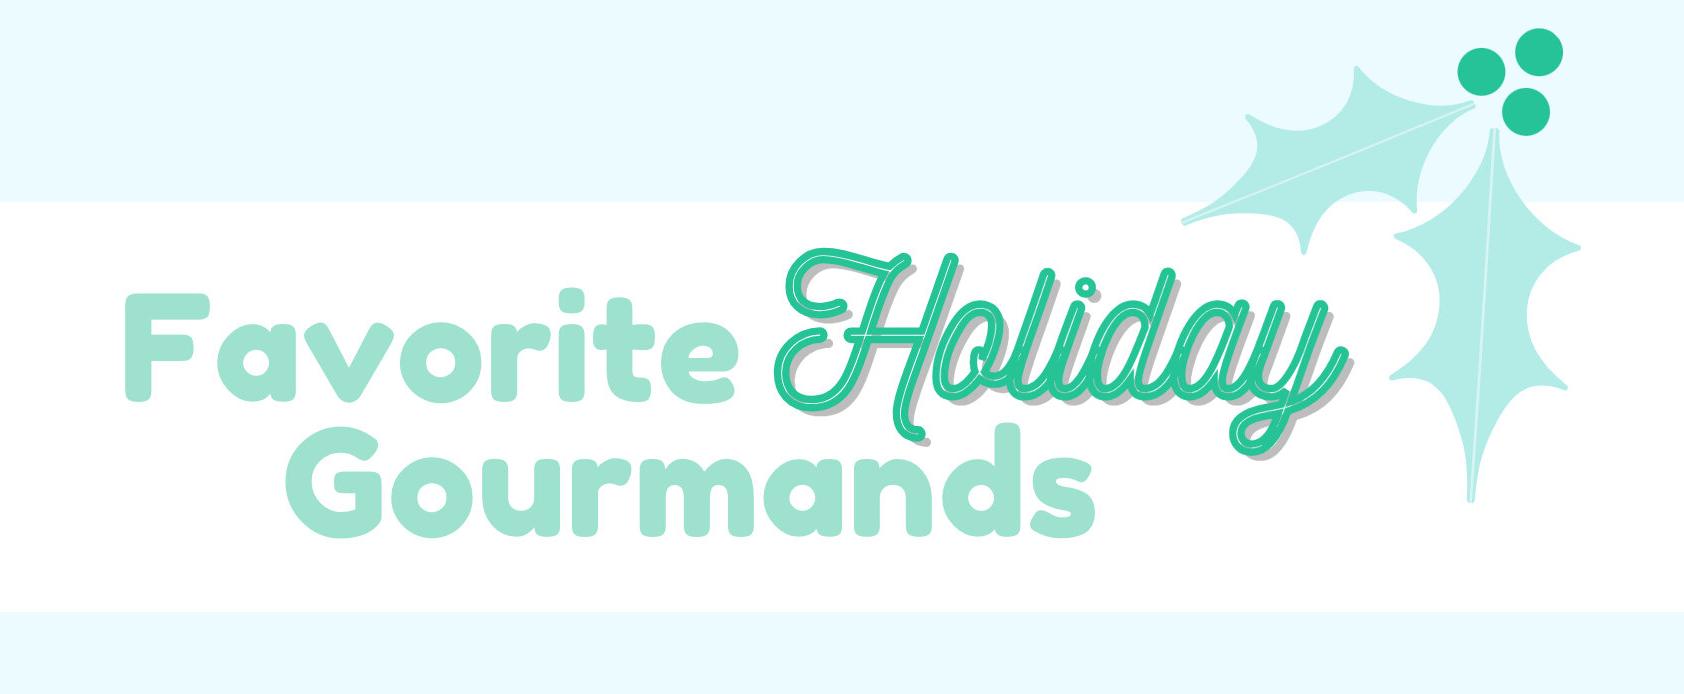 Favorite Holiday Gourmands